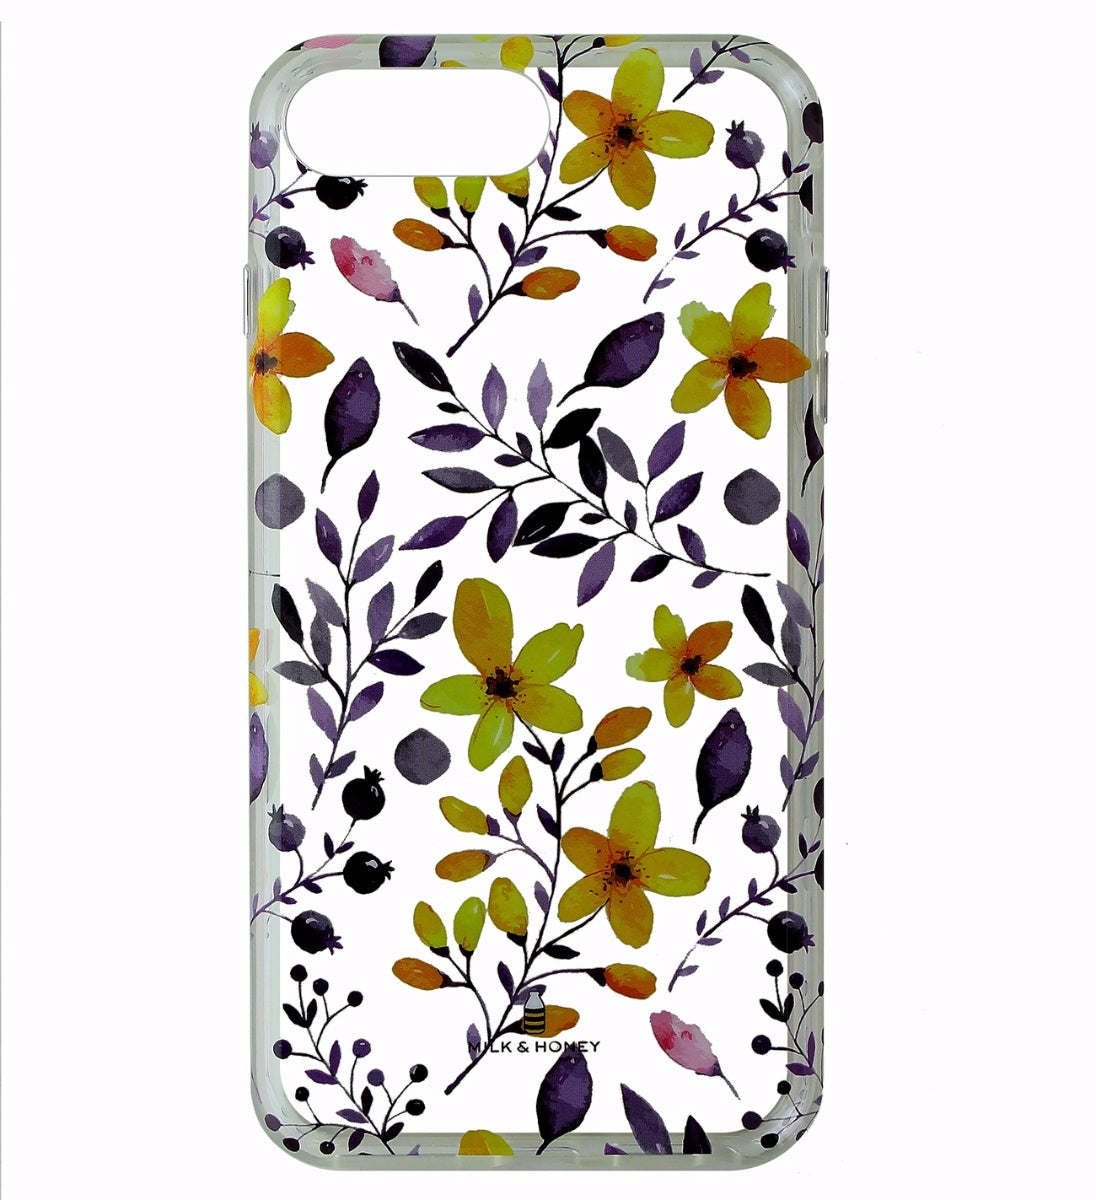 Milk and Honey Floral Case for Apple iPhone 7 Plus / 6s Plus - Clear / Flowers